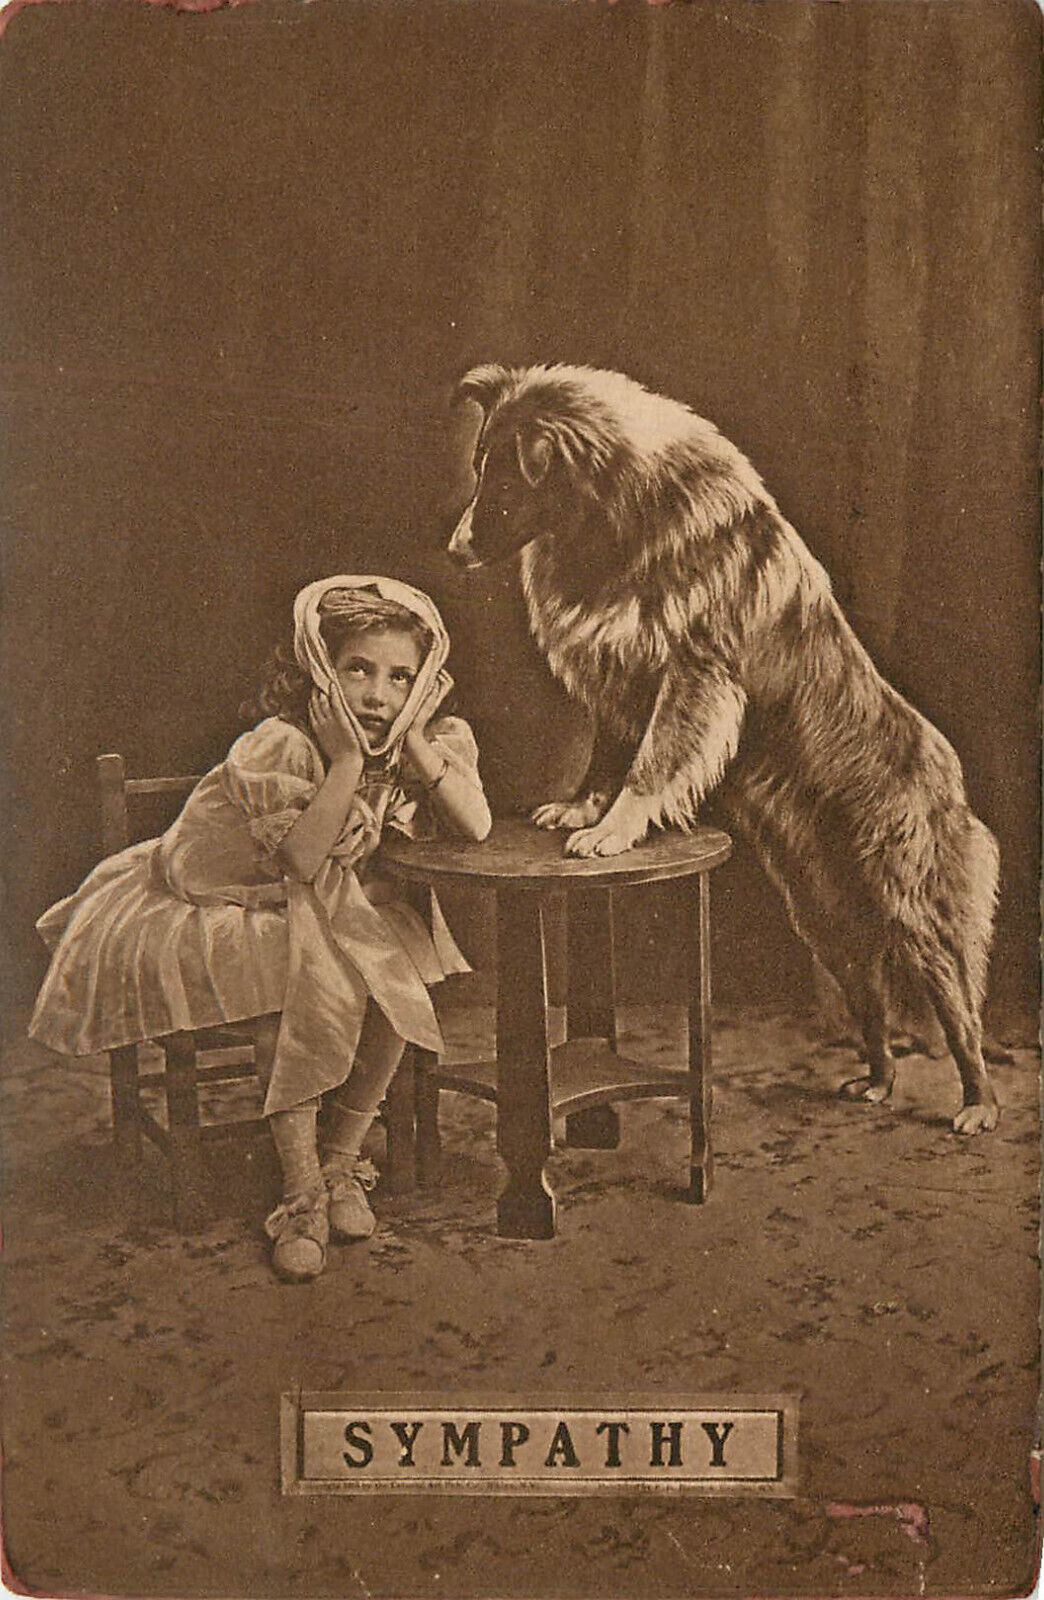 Rough Coat Border Collie Watches Over Girl With Toothache Sympathy Postcard Dog